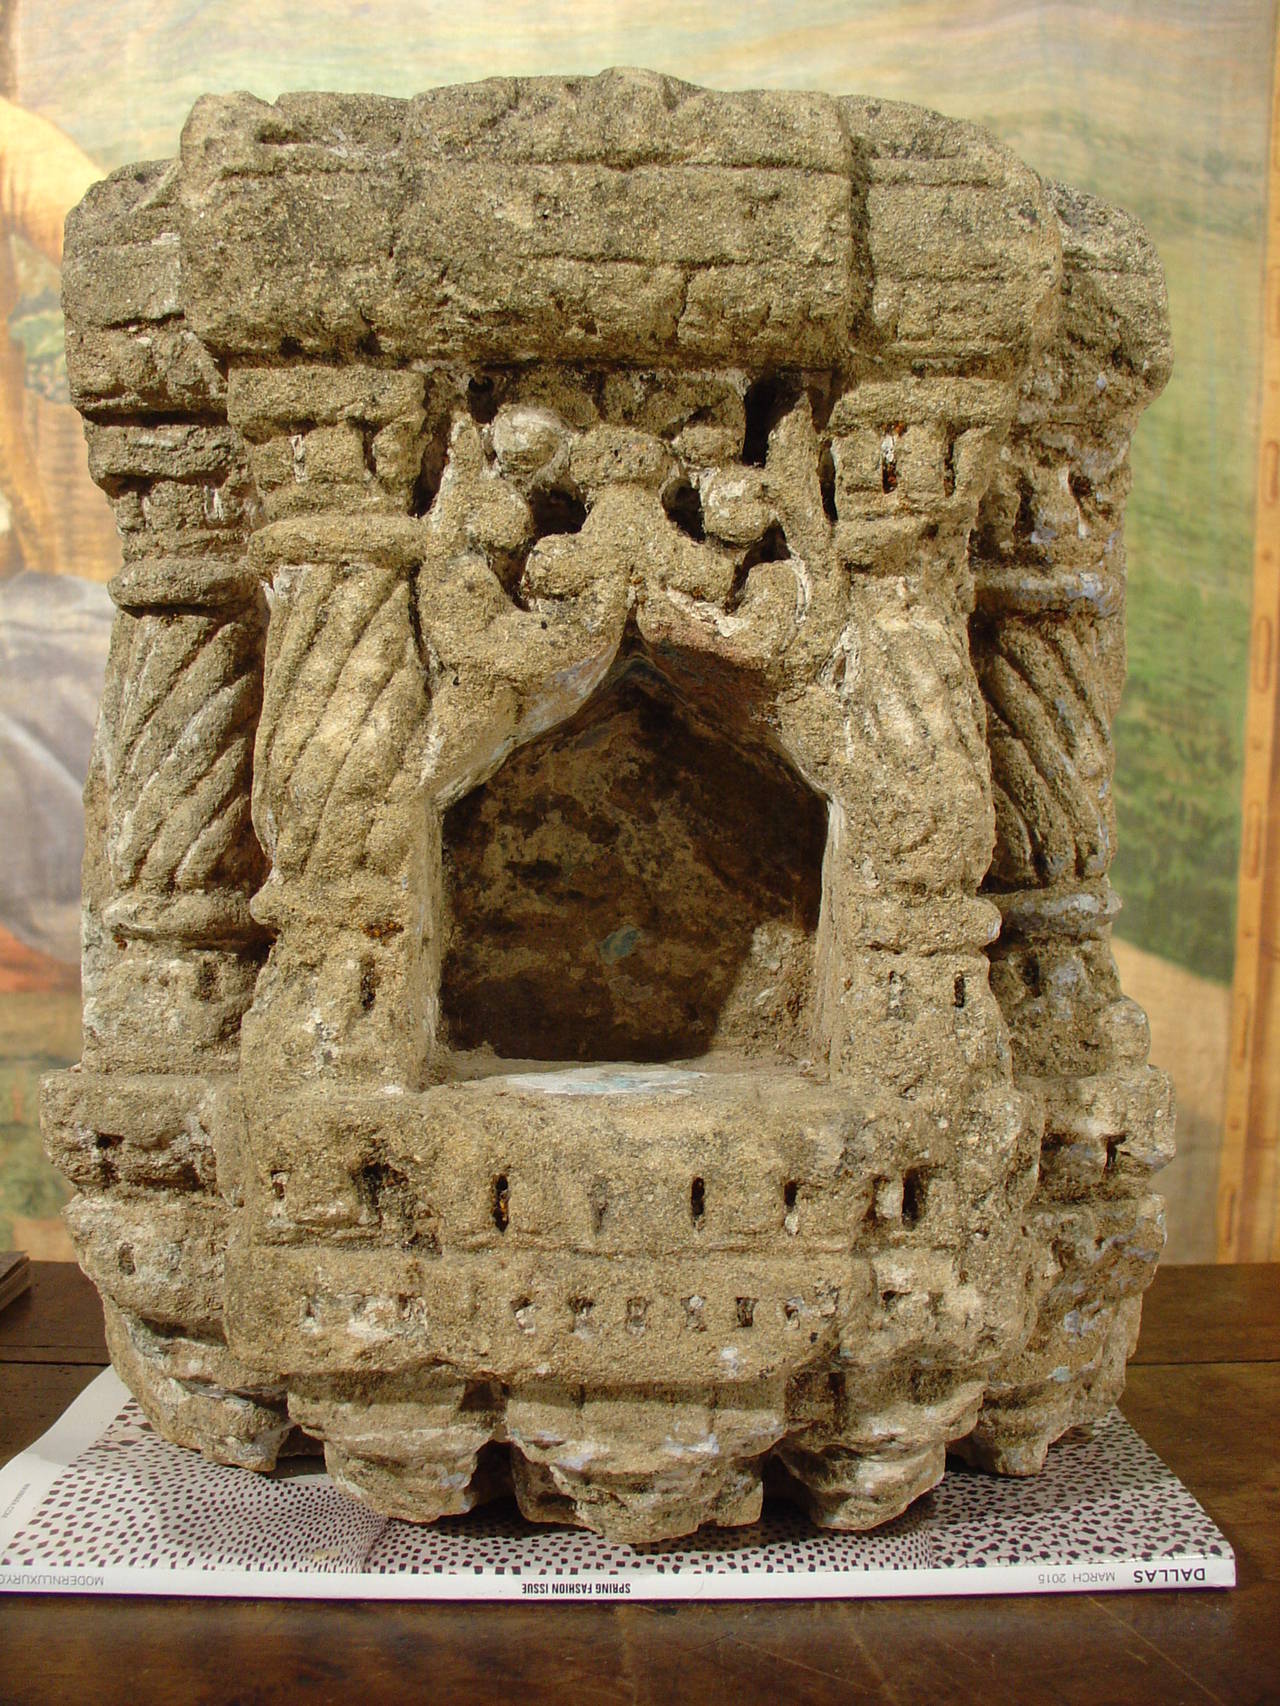 Small antique stone shrines were usually vehicles for holding items which were related to a deity that was associated with a religion.  We acquired these shrines because of their charming size, age, and workmanship.  It is not common to find two of